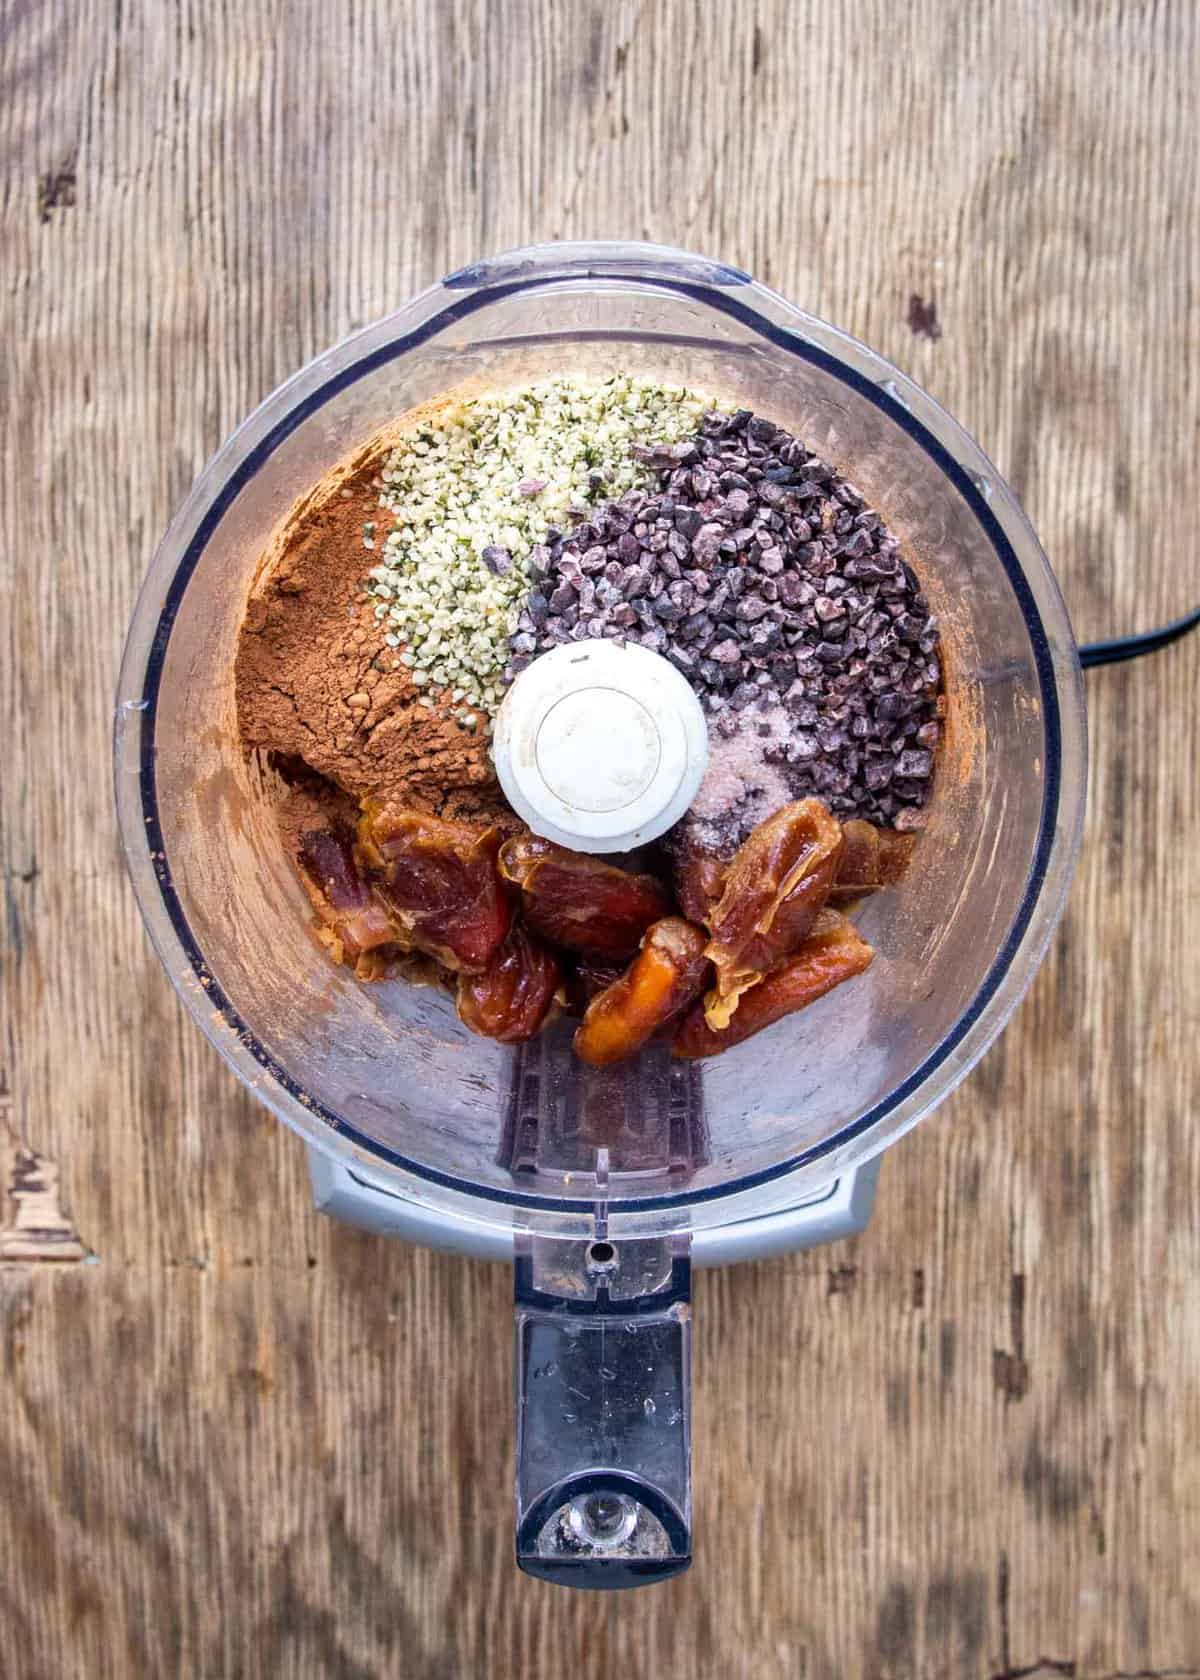 Add all ingredients to a food processor